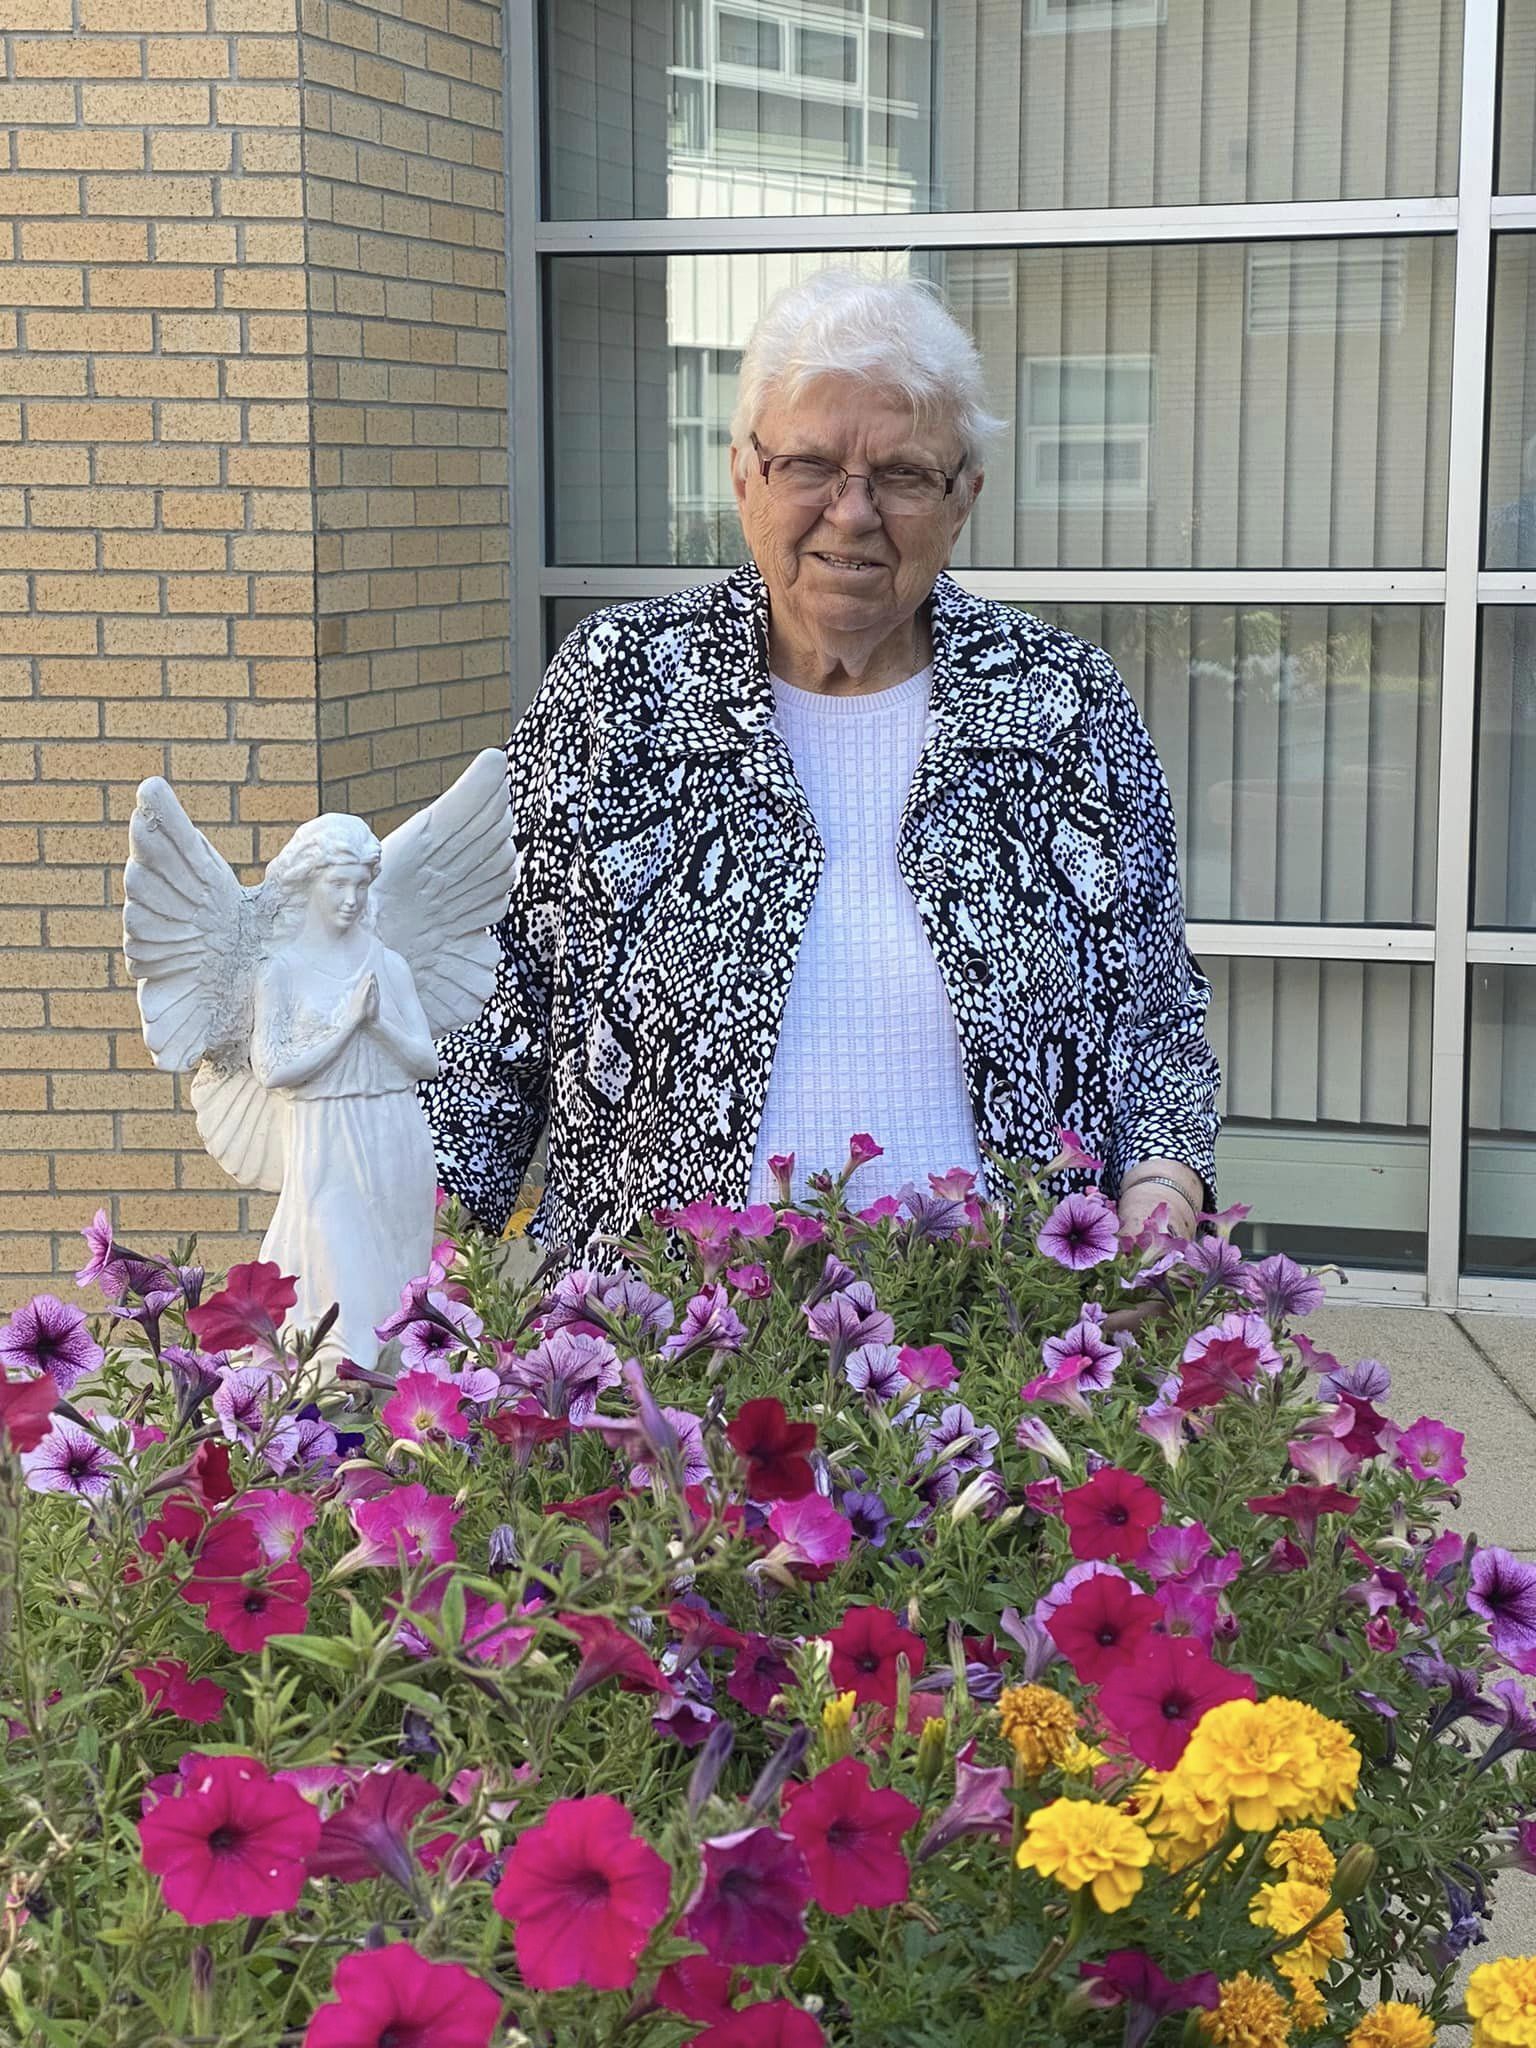 Prioress Reflection for the Funeral of Sister Rita Miller, OSB